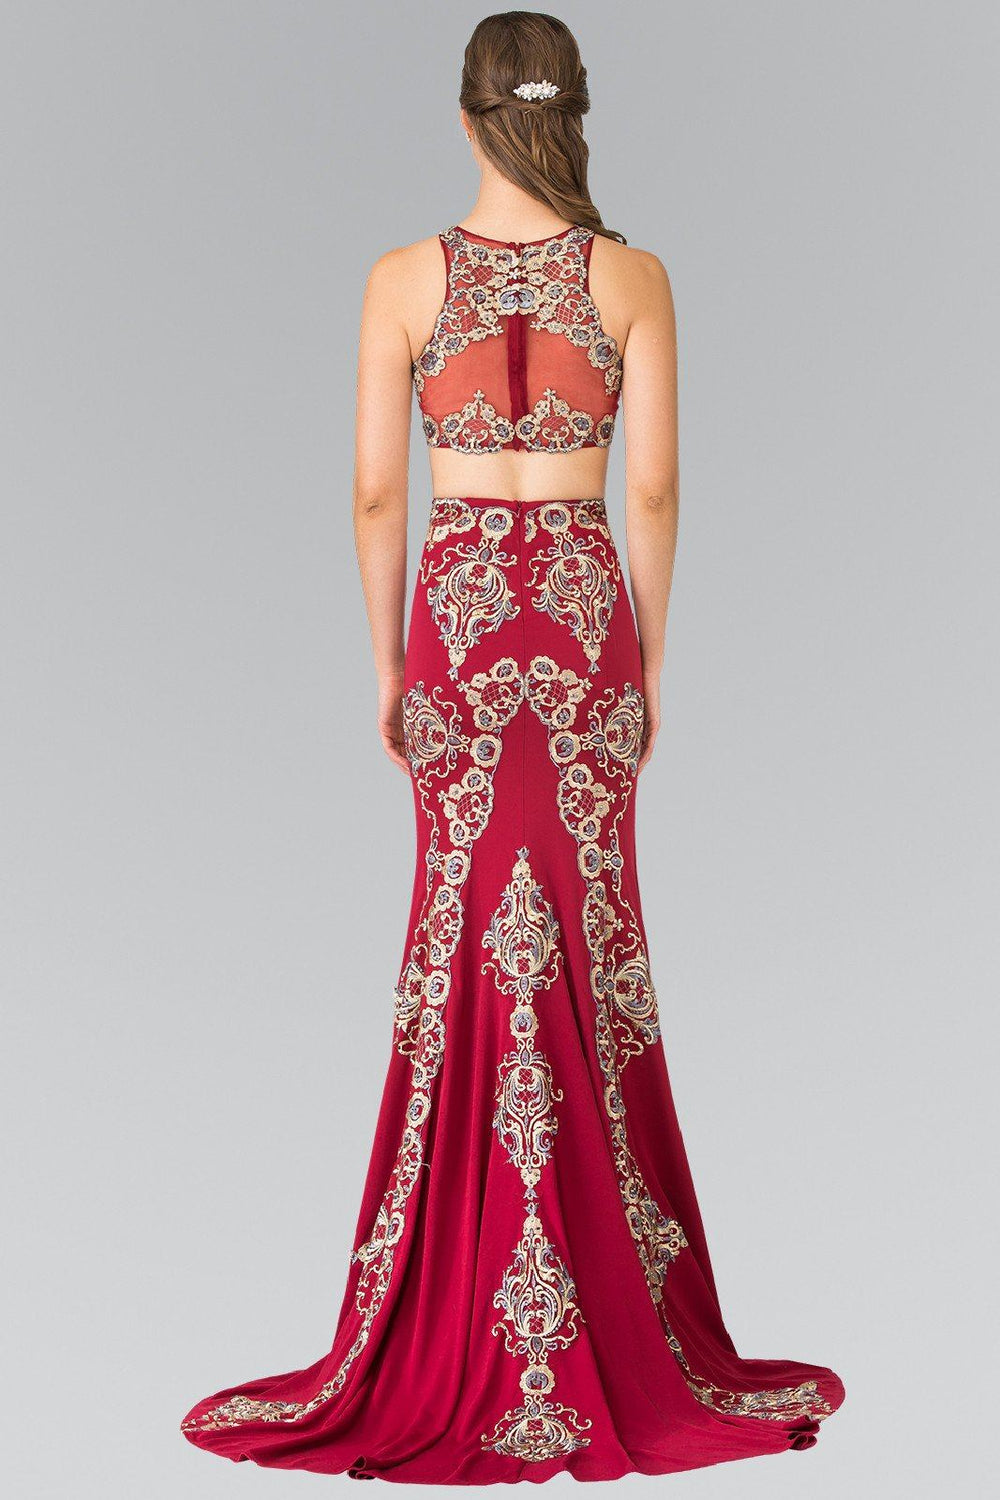 Long Two-Piece Embroidered Illusion Dress by Elizabeth K GL2296-Long Formal Dresses-ABC Fashion